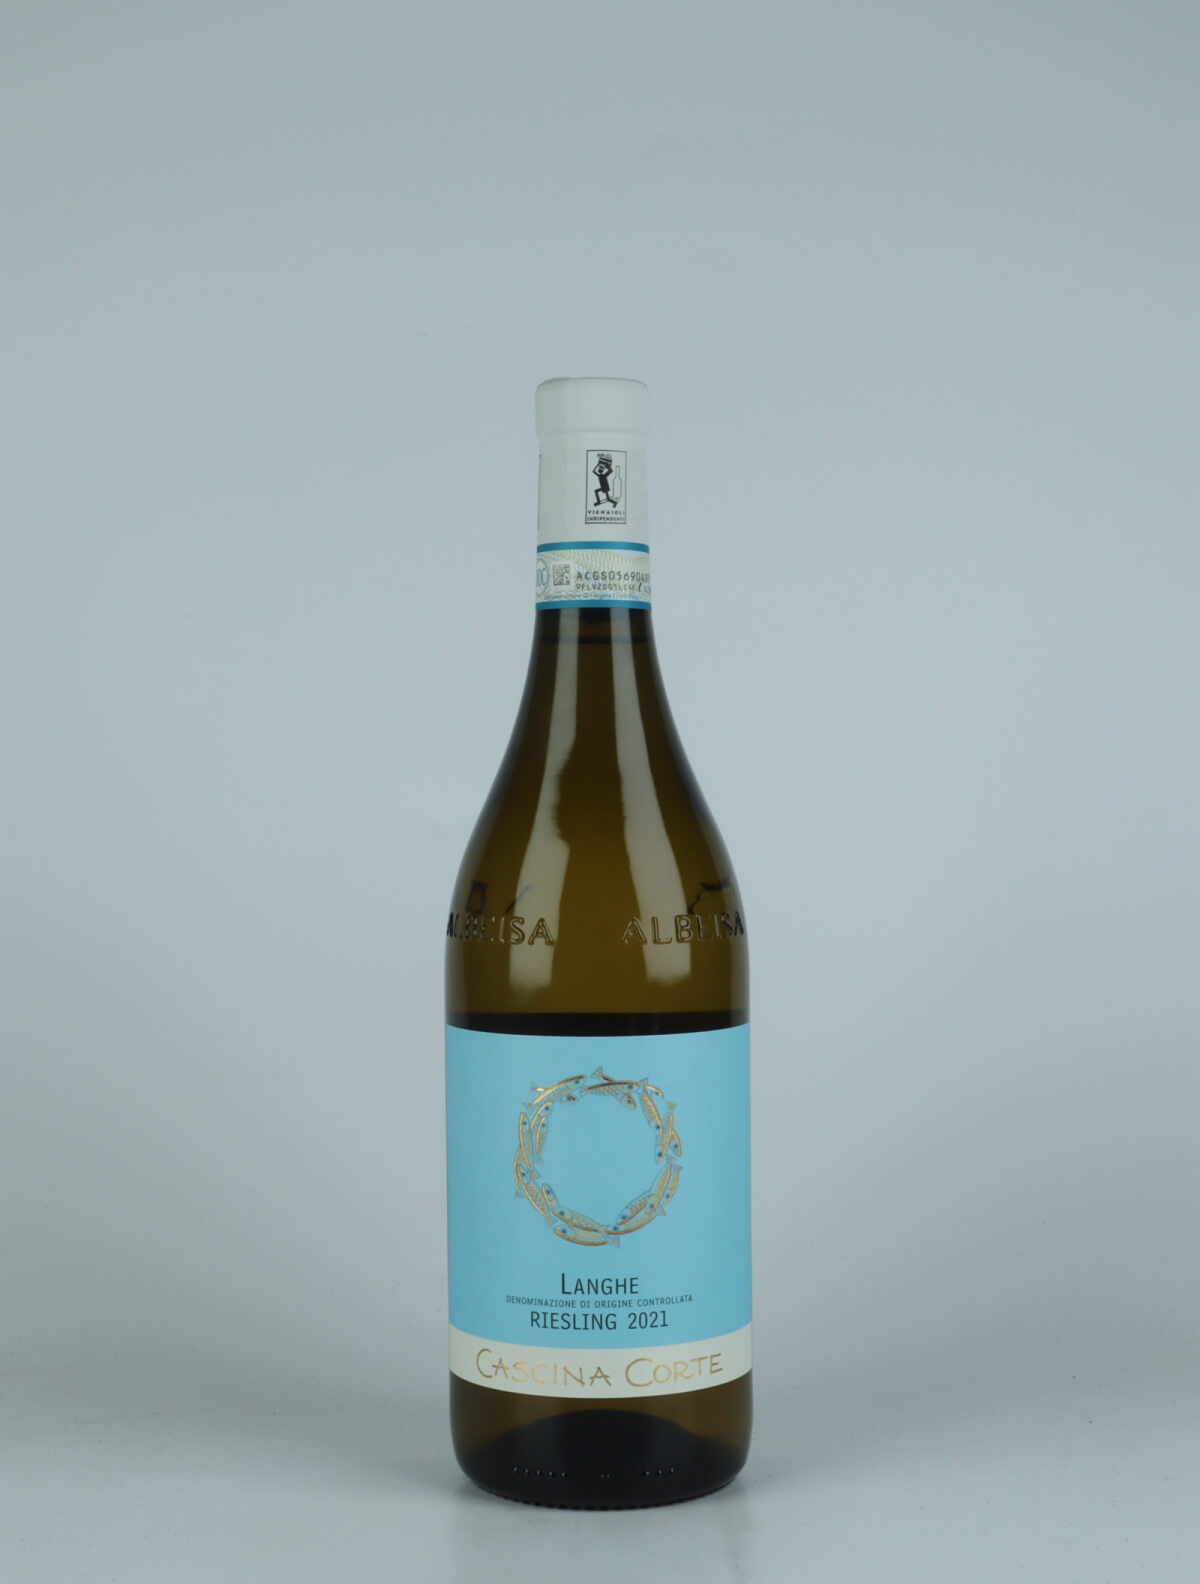 A bottle 2021 Langhe Riesling White wine from Cascina Corte, Piedmont in Italy